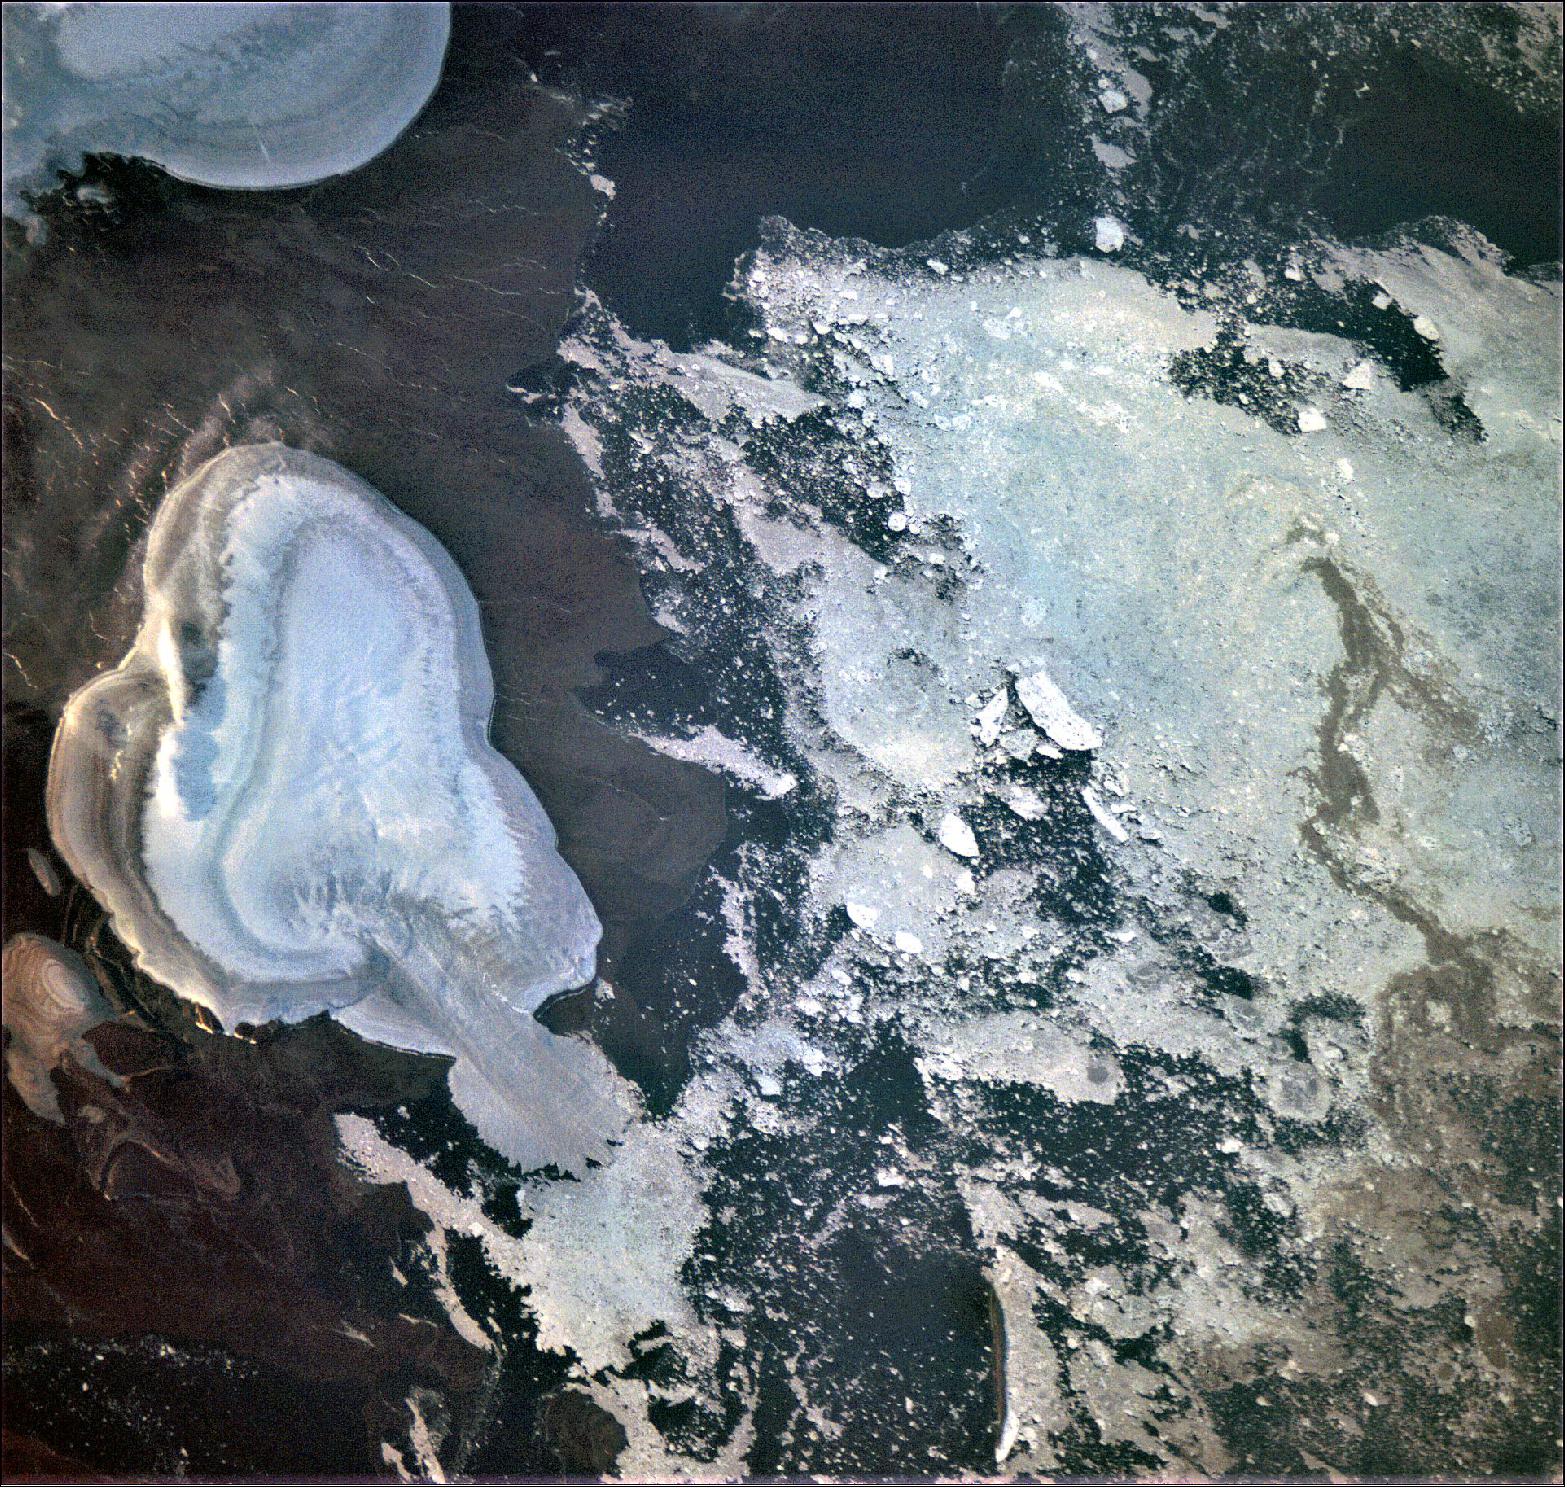 Figure 39: This image reveals part of an impressive uninhabited island north of Russia, first discovered in 1913. October Revolution Island is now known to be the 59th largest island in the world, and houses five domed ice caps – a mass of ice that covers less than 50,000 km2 (whereas larger ice masses are known as ice sheets). Taken on 14 August 2020 by ESA’s OPS-SAT spacecraft during commissioning of its high-definition camera, the left half of the image shows the island with its characteristic icefields and tundra, and right part of the image shows the Arctic Laptev Sea with large amounts of drift ice (image credit: ESA) 44)